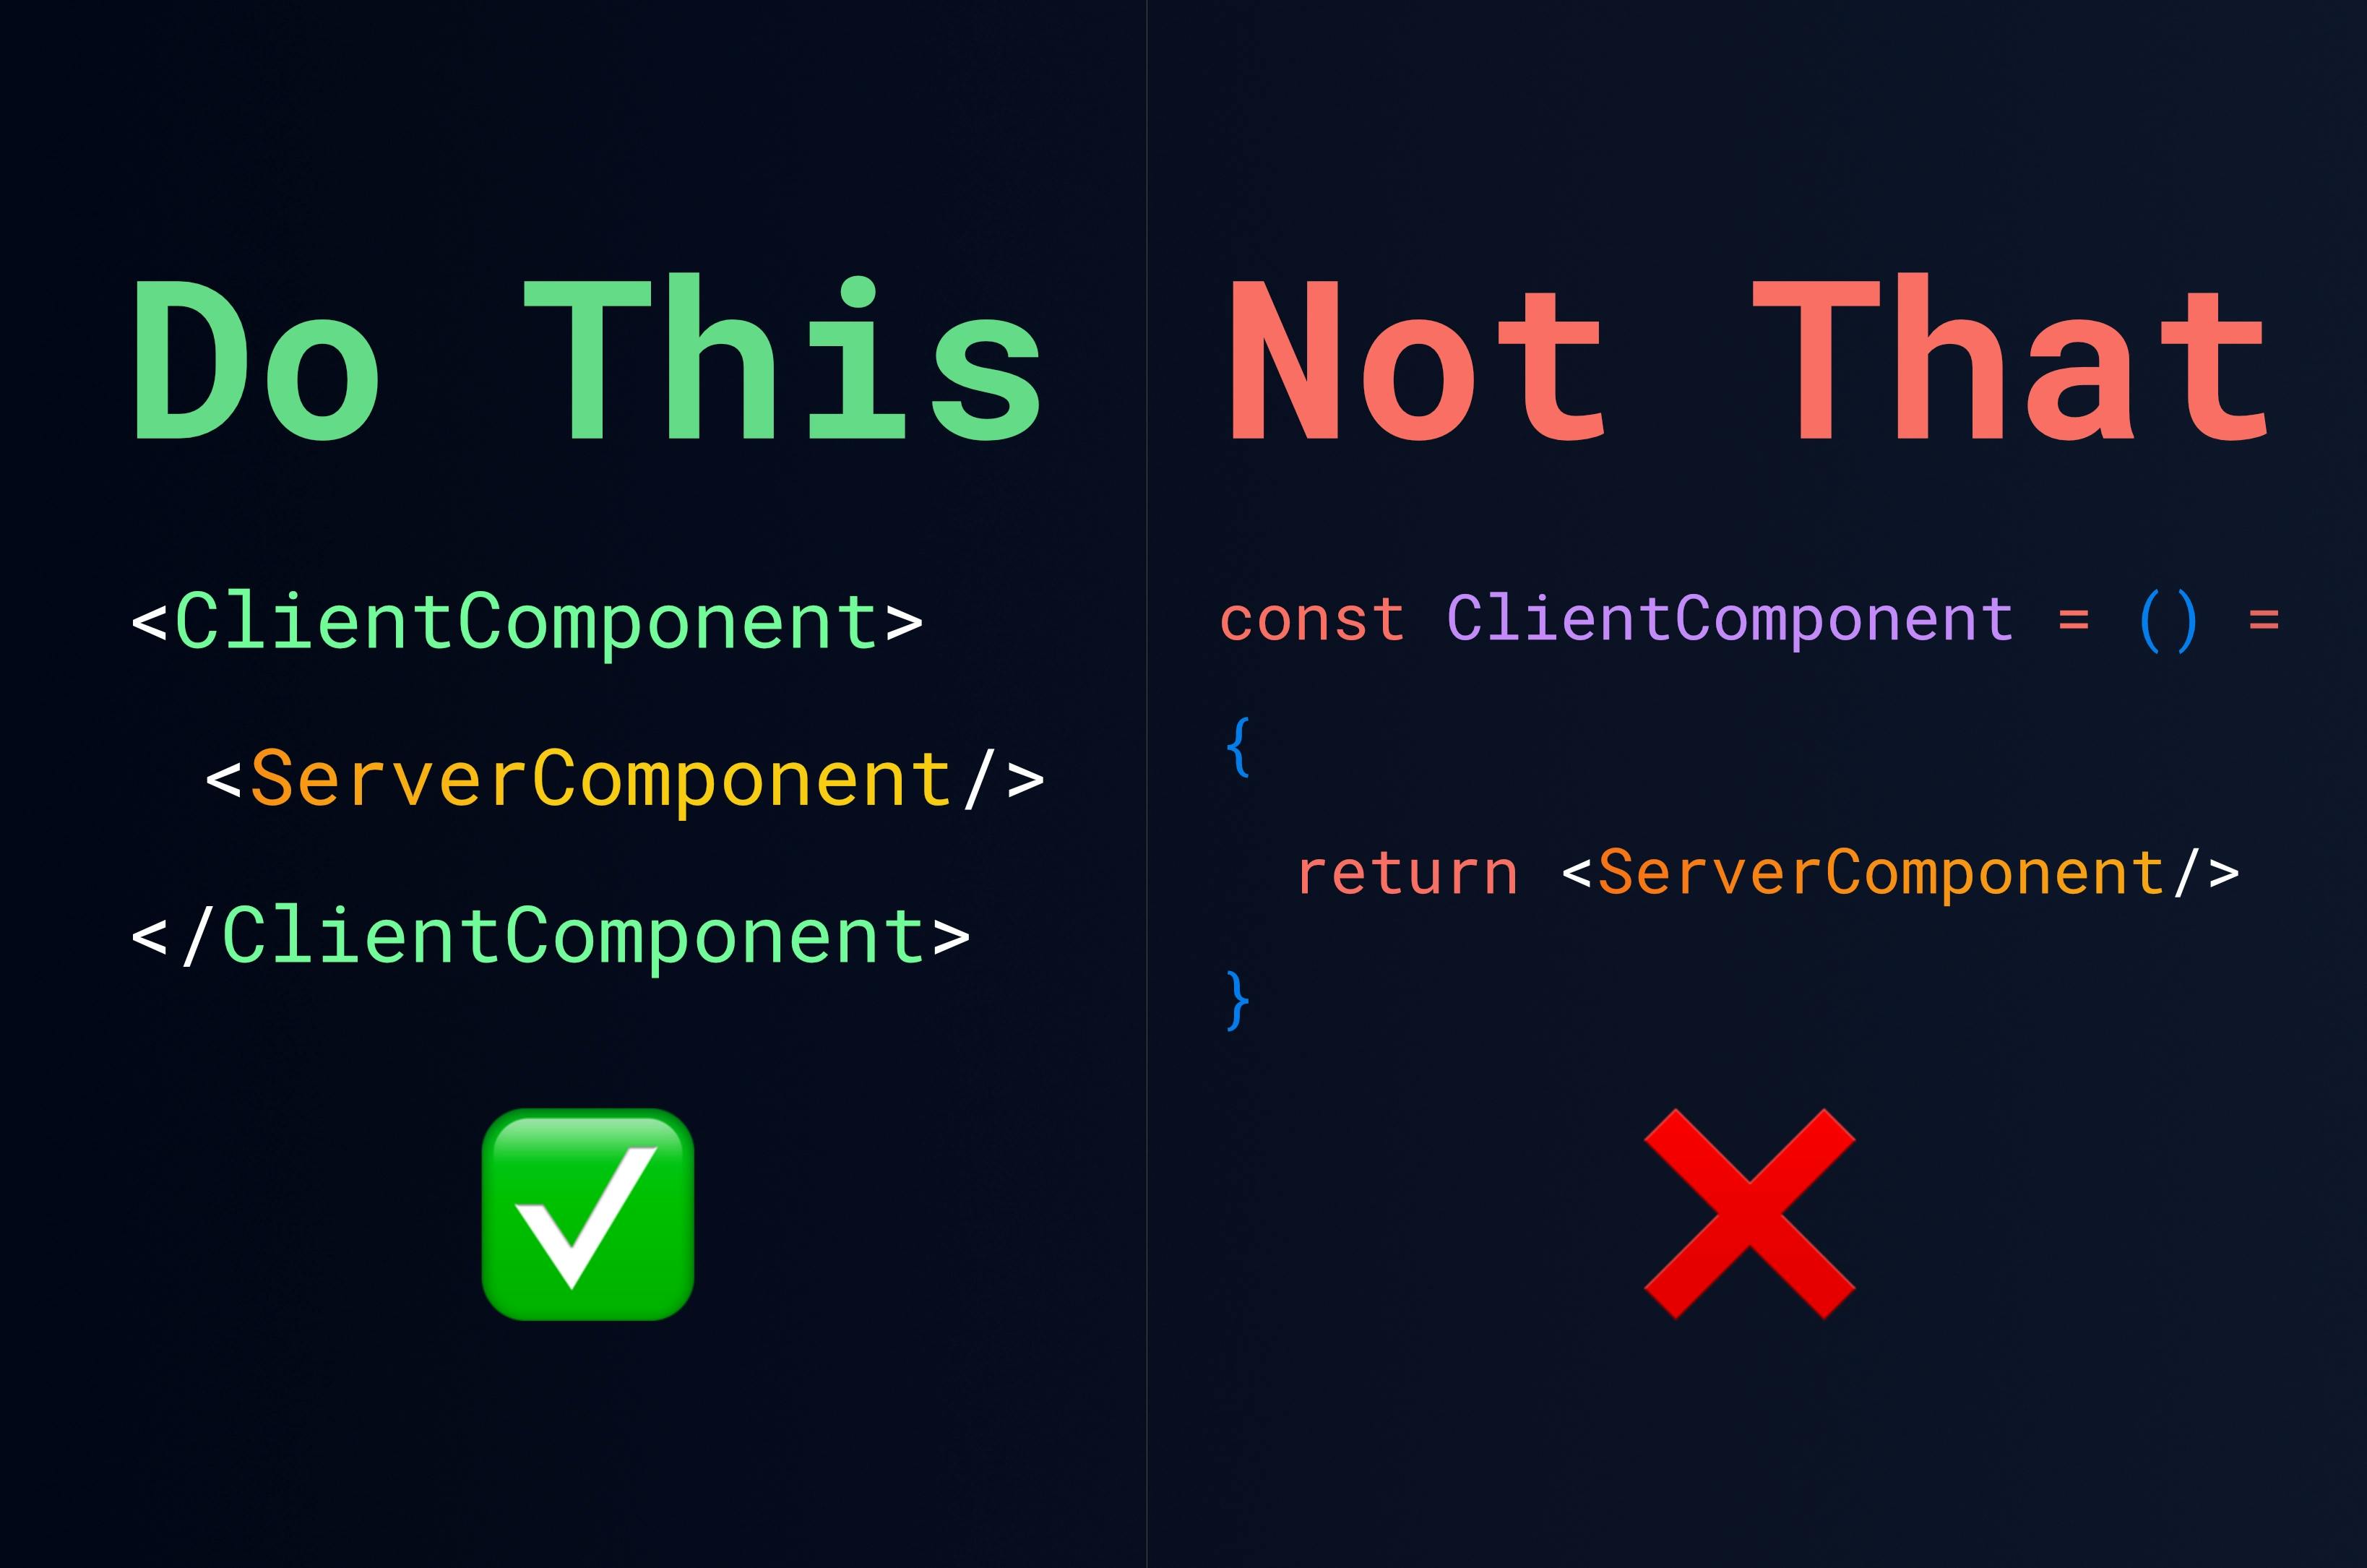 Cover Image for What You Need to Know About Server Components in Next.js 13